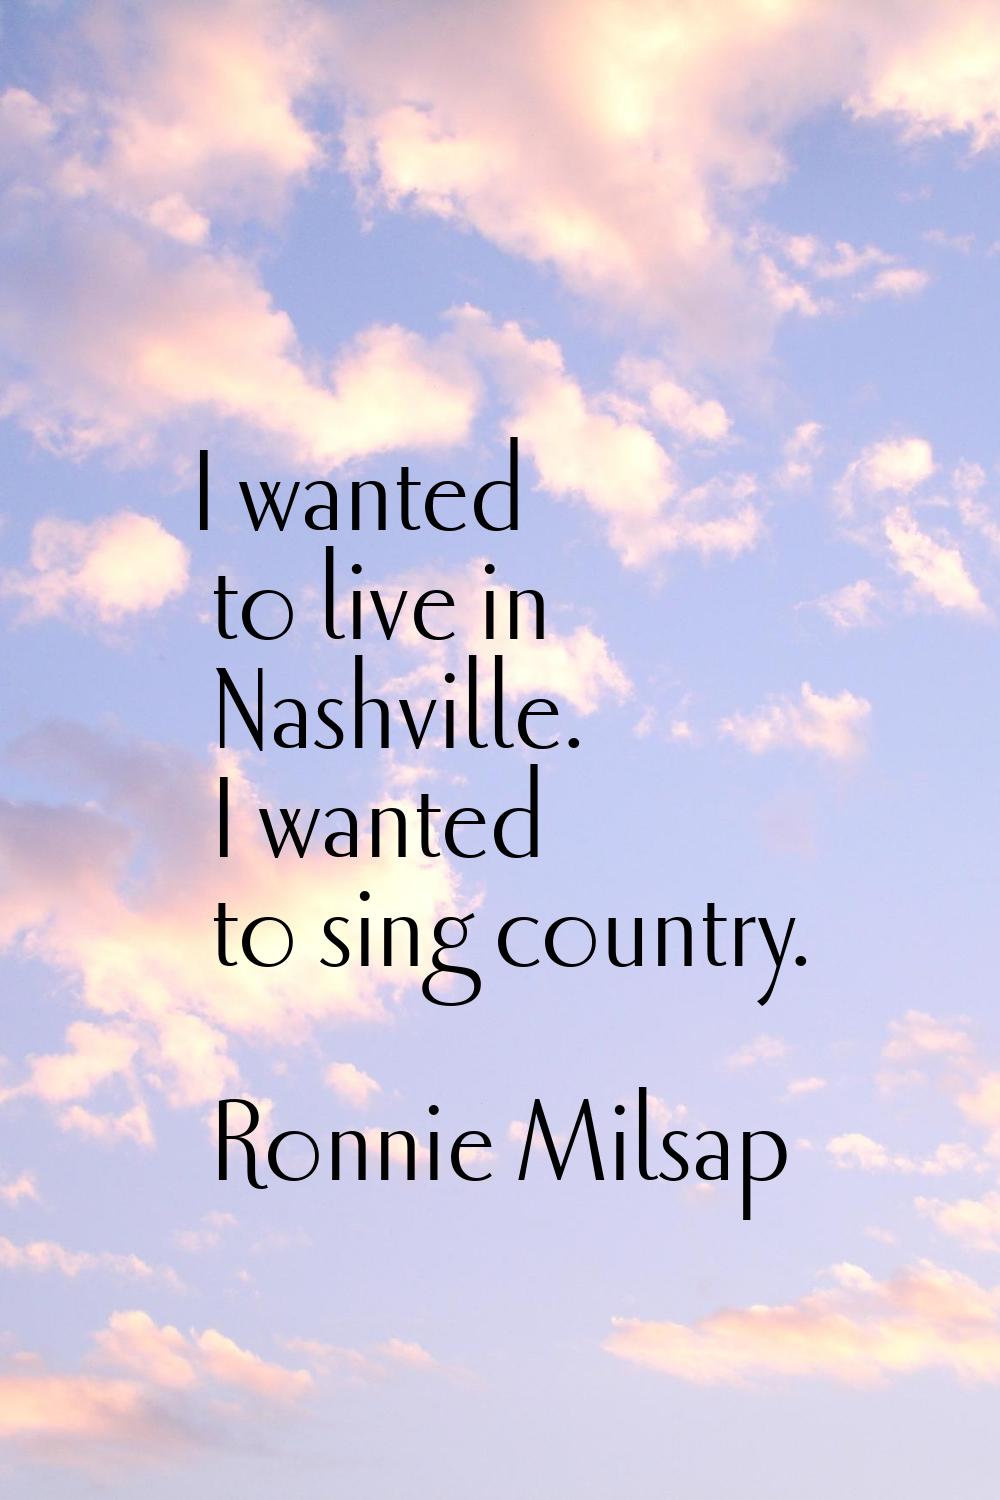 I wanted to live in Nashville. I wanted to sing country.